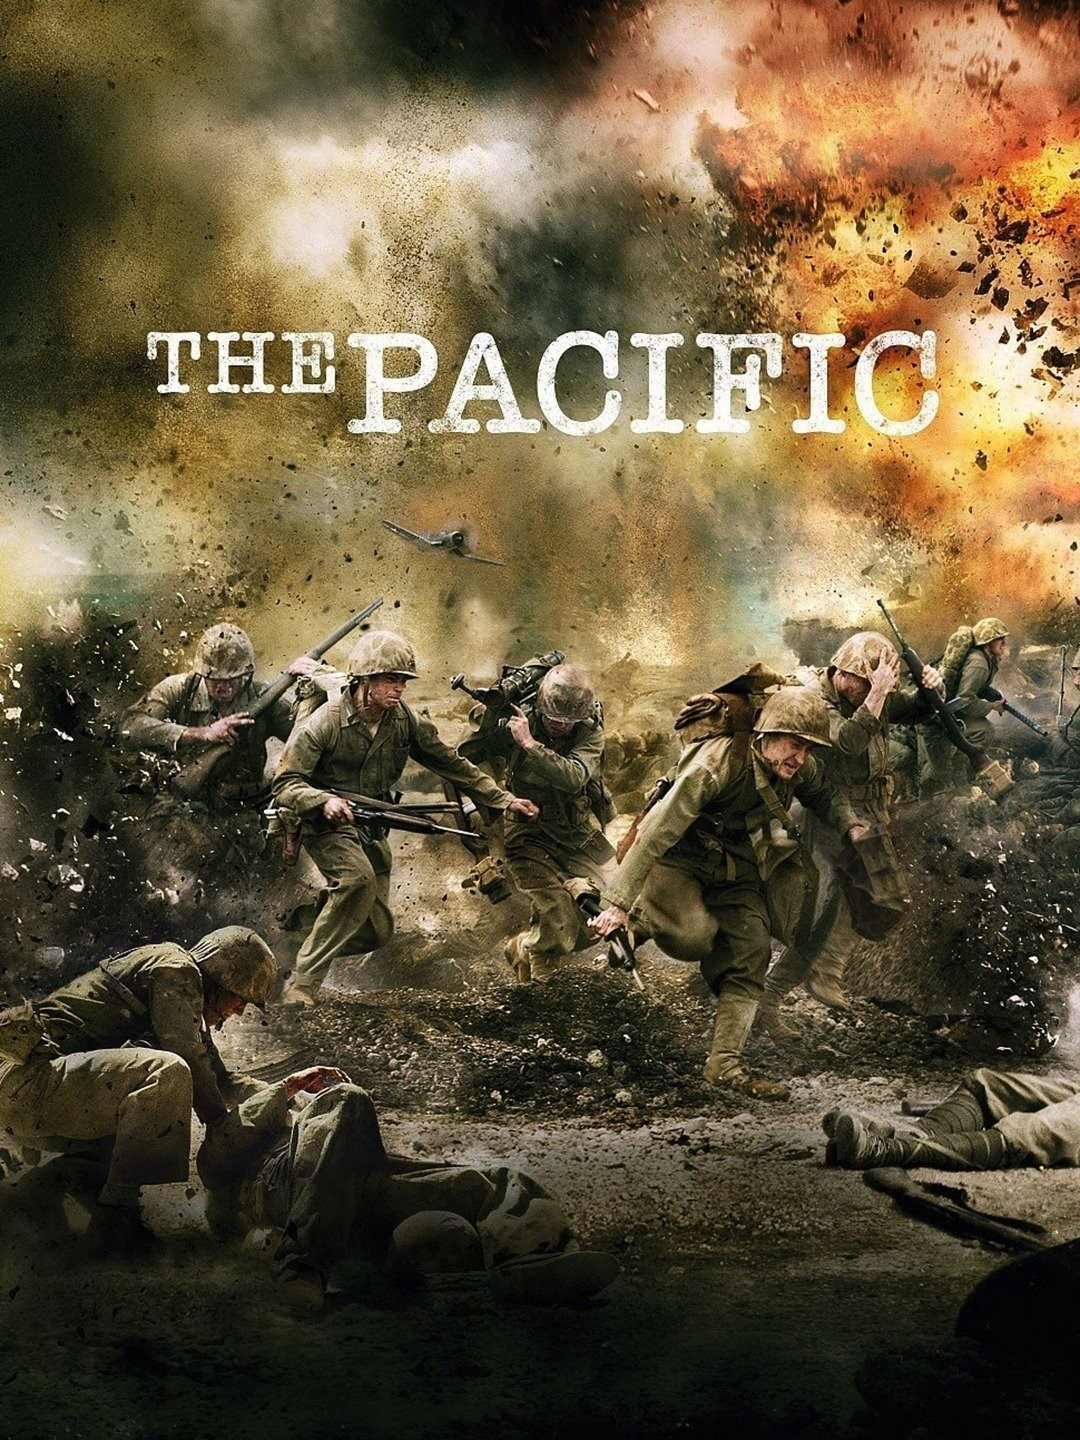 The Breaking Point - Band of Brothers (Temporada 1, Episódio 7) - Apple TV  (BR)